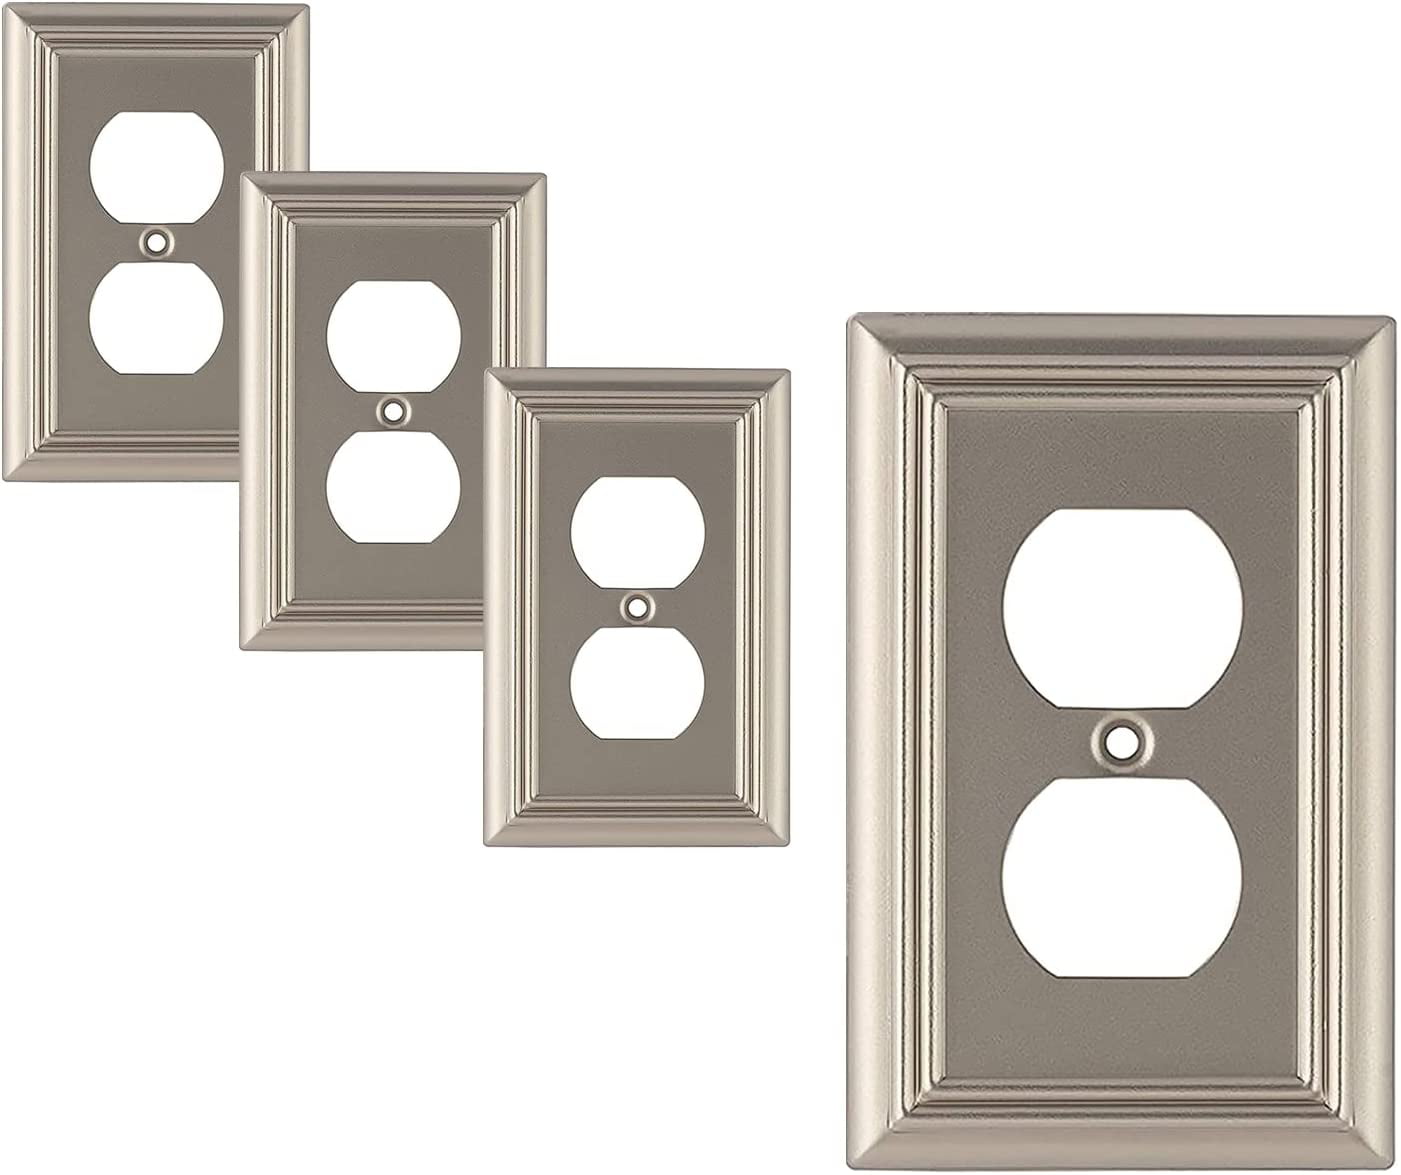 Pack of 4 Sleek Lighting W35242-PW Architecture Single Duplex Wall Plate Outlet 